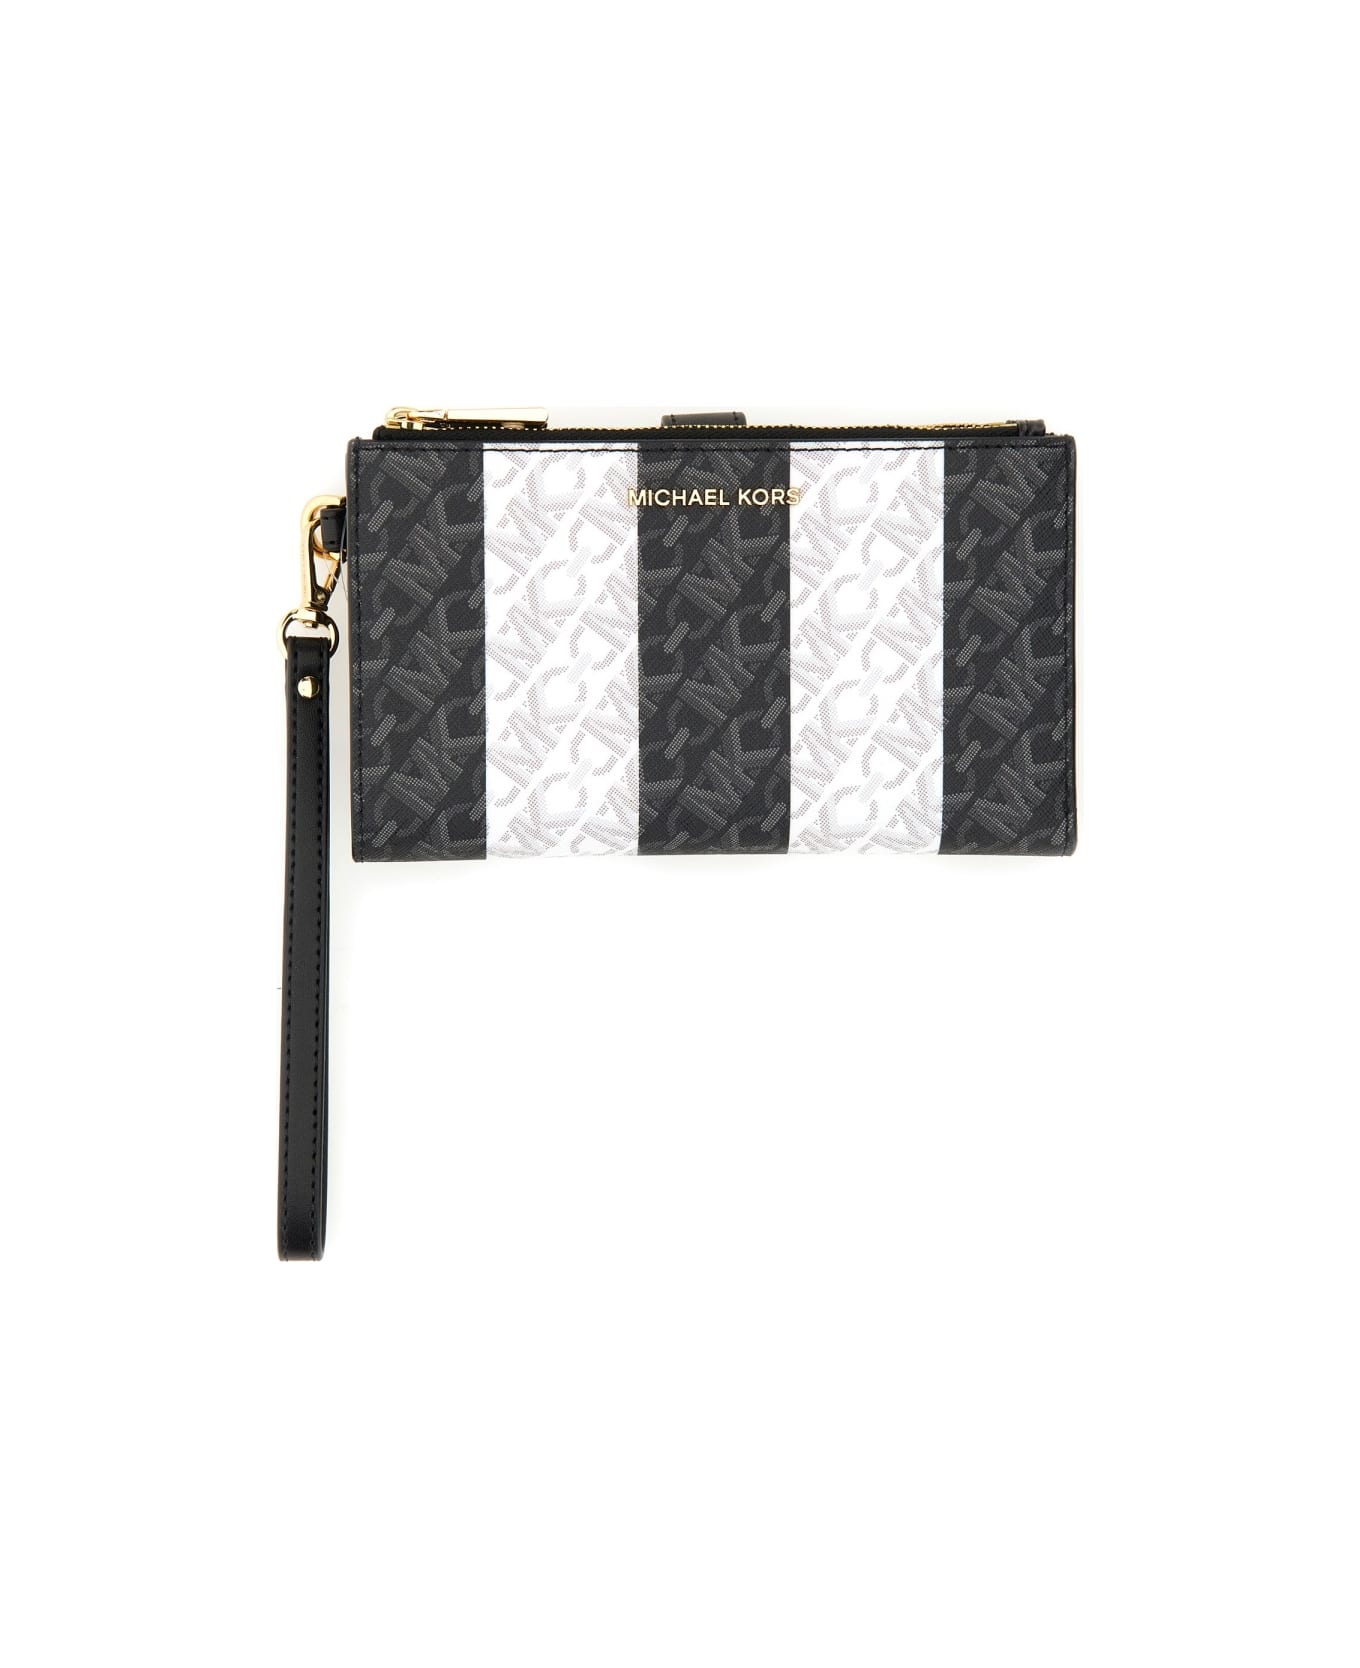 Michael Kors Wallet With Logo - MULTICOLOUR クラッチバッグ